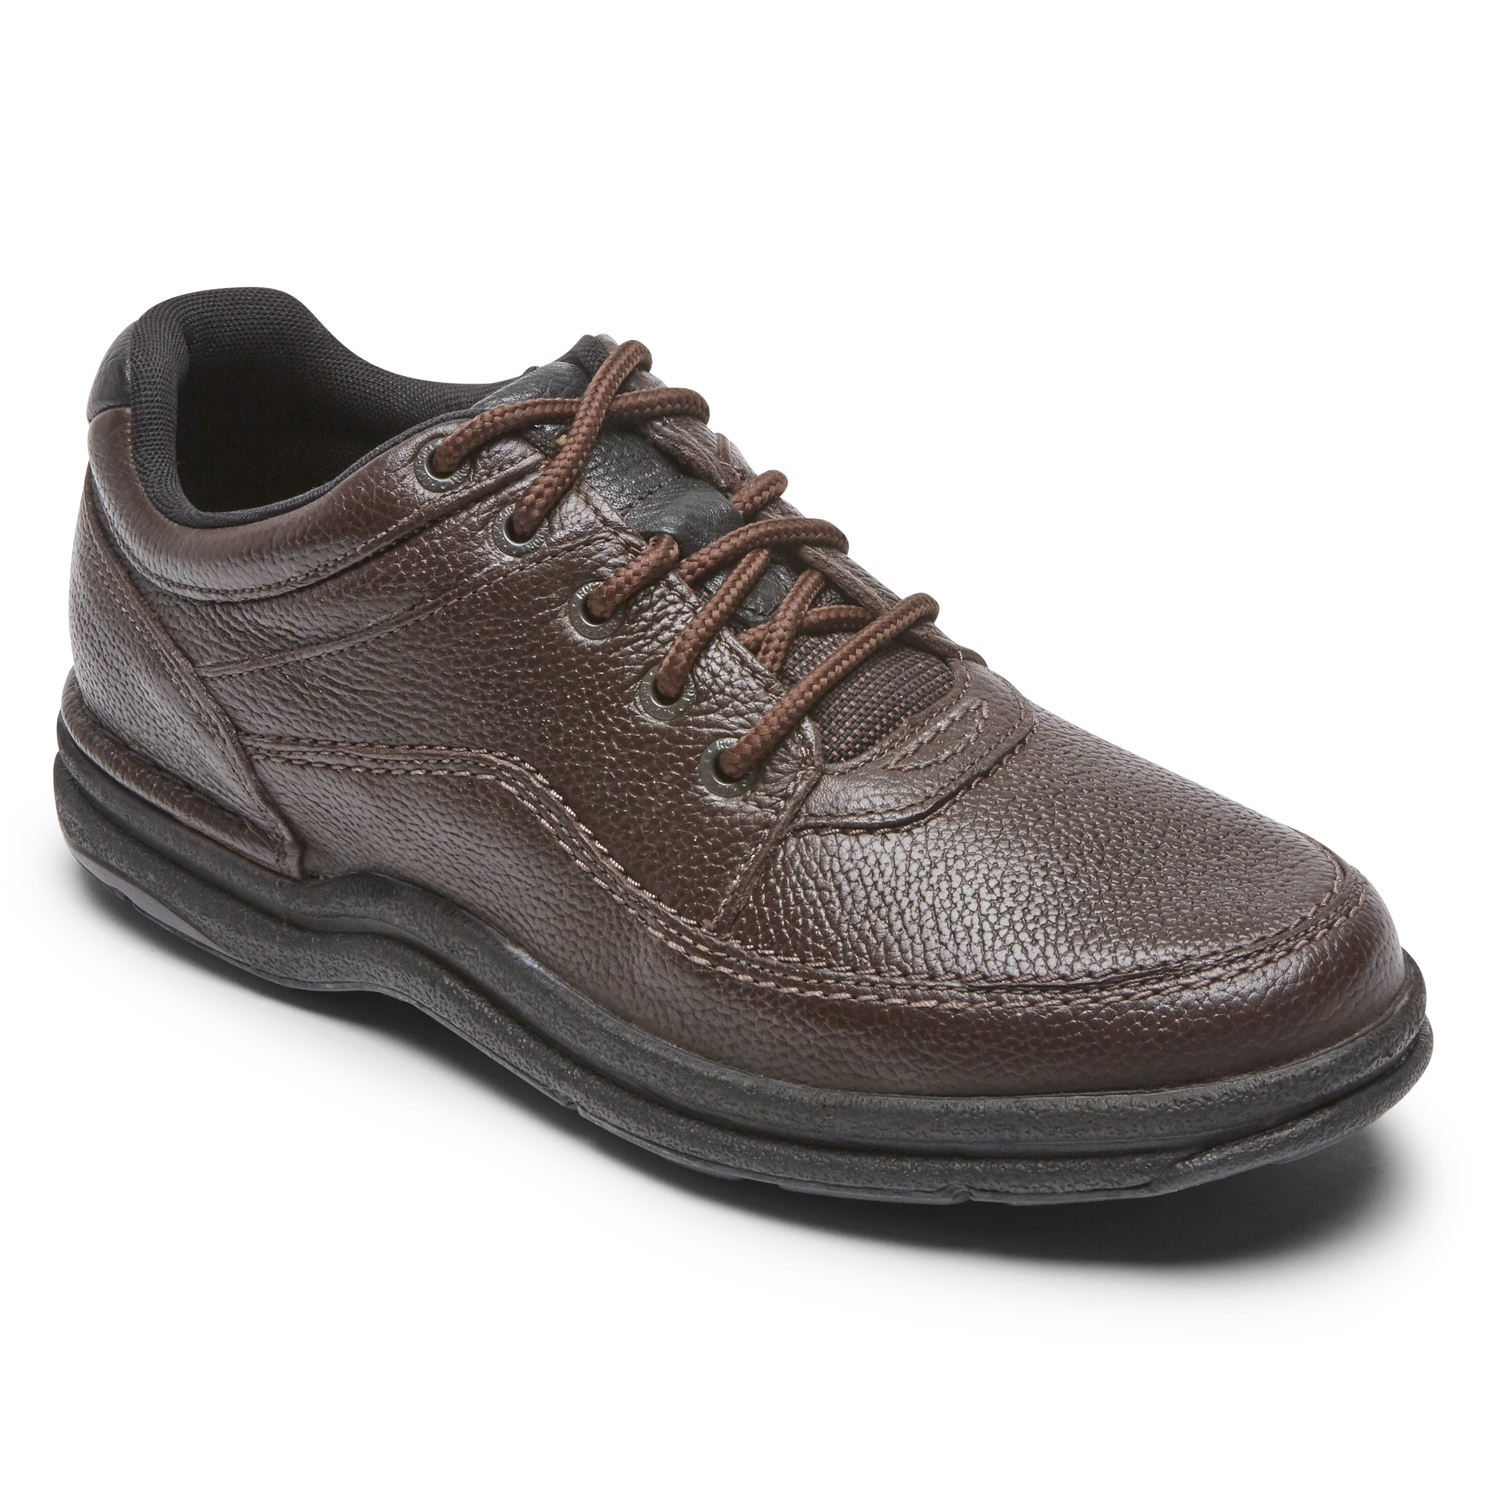 Rockport Men's World Tour Classic in Brown Tumbled - Daniels Shoes